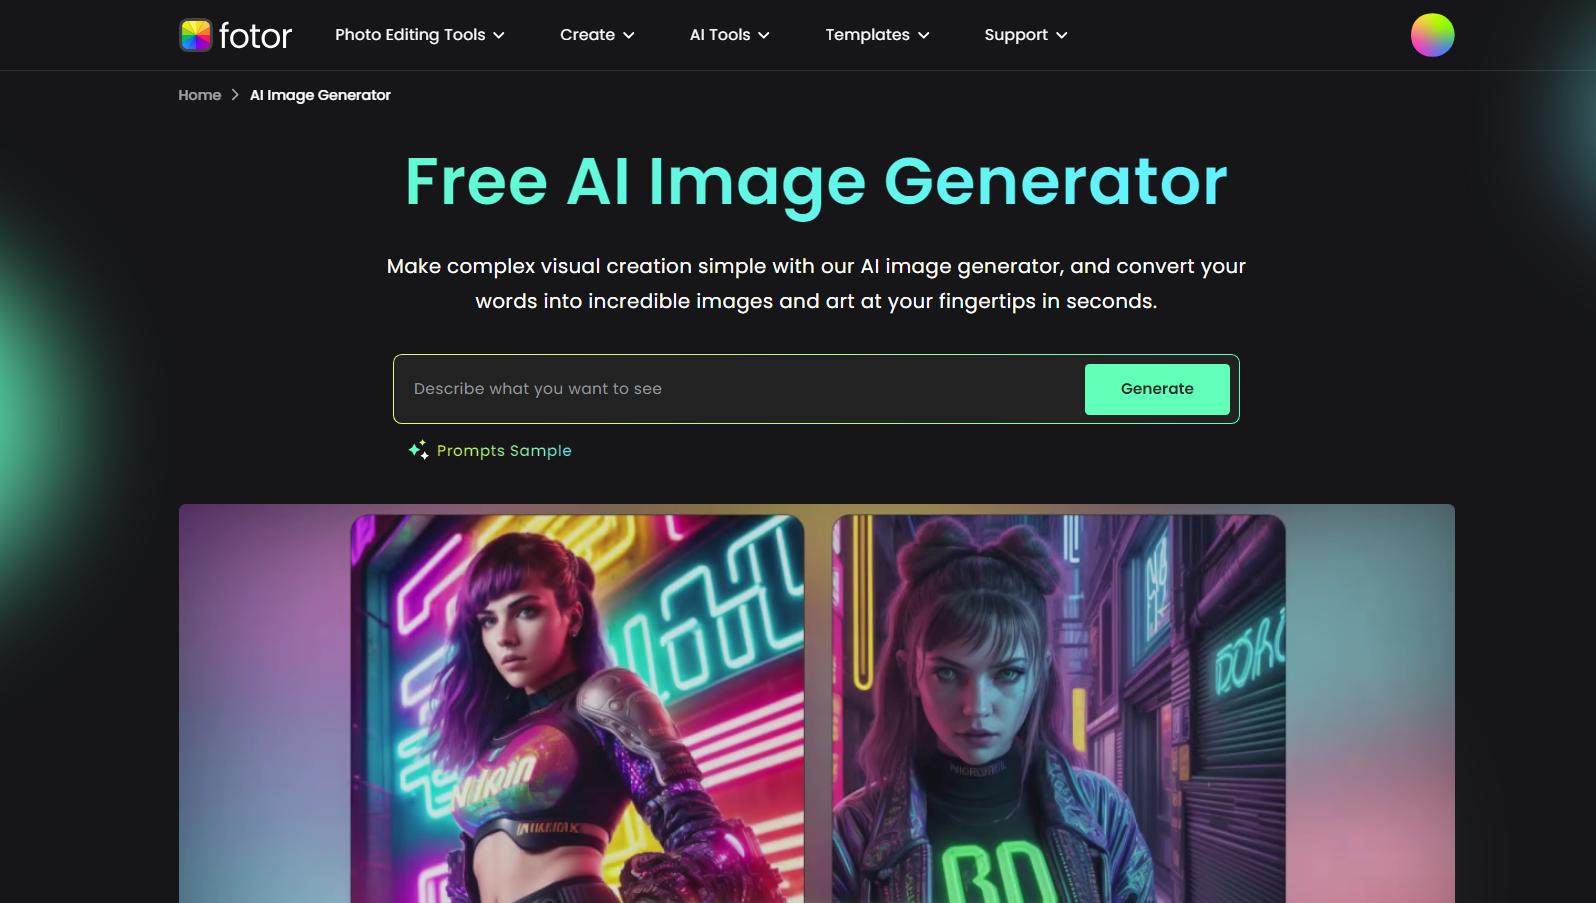 Google's Gemini Launches a Challenge on AI Image Generation | Fotor